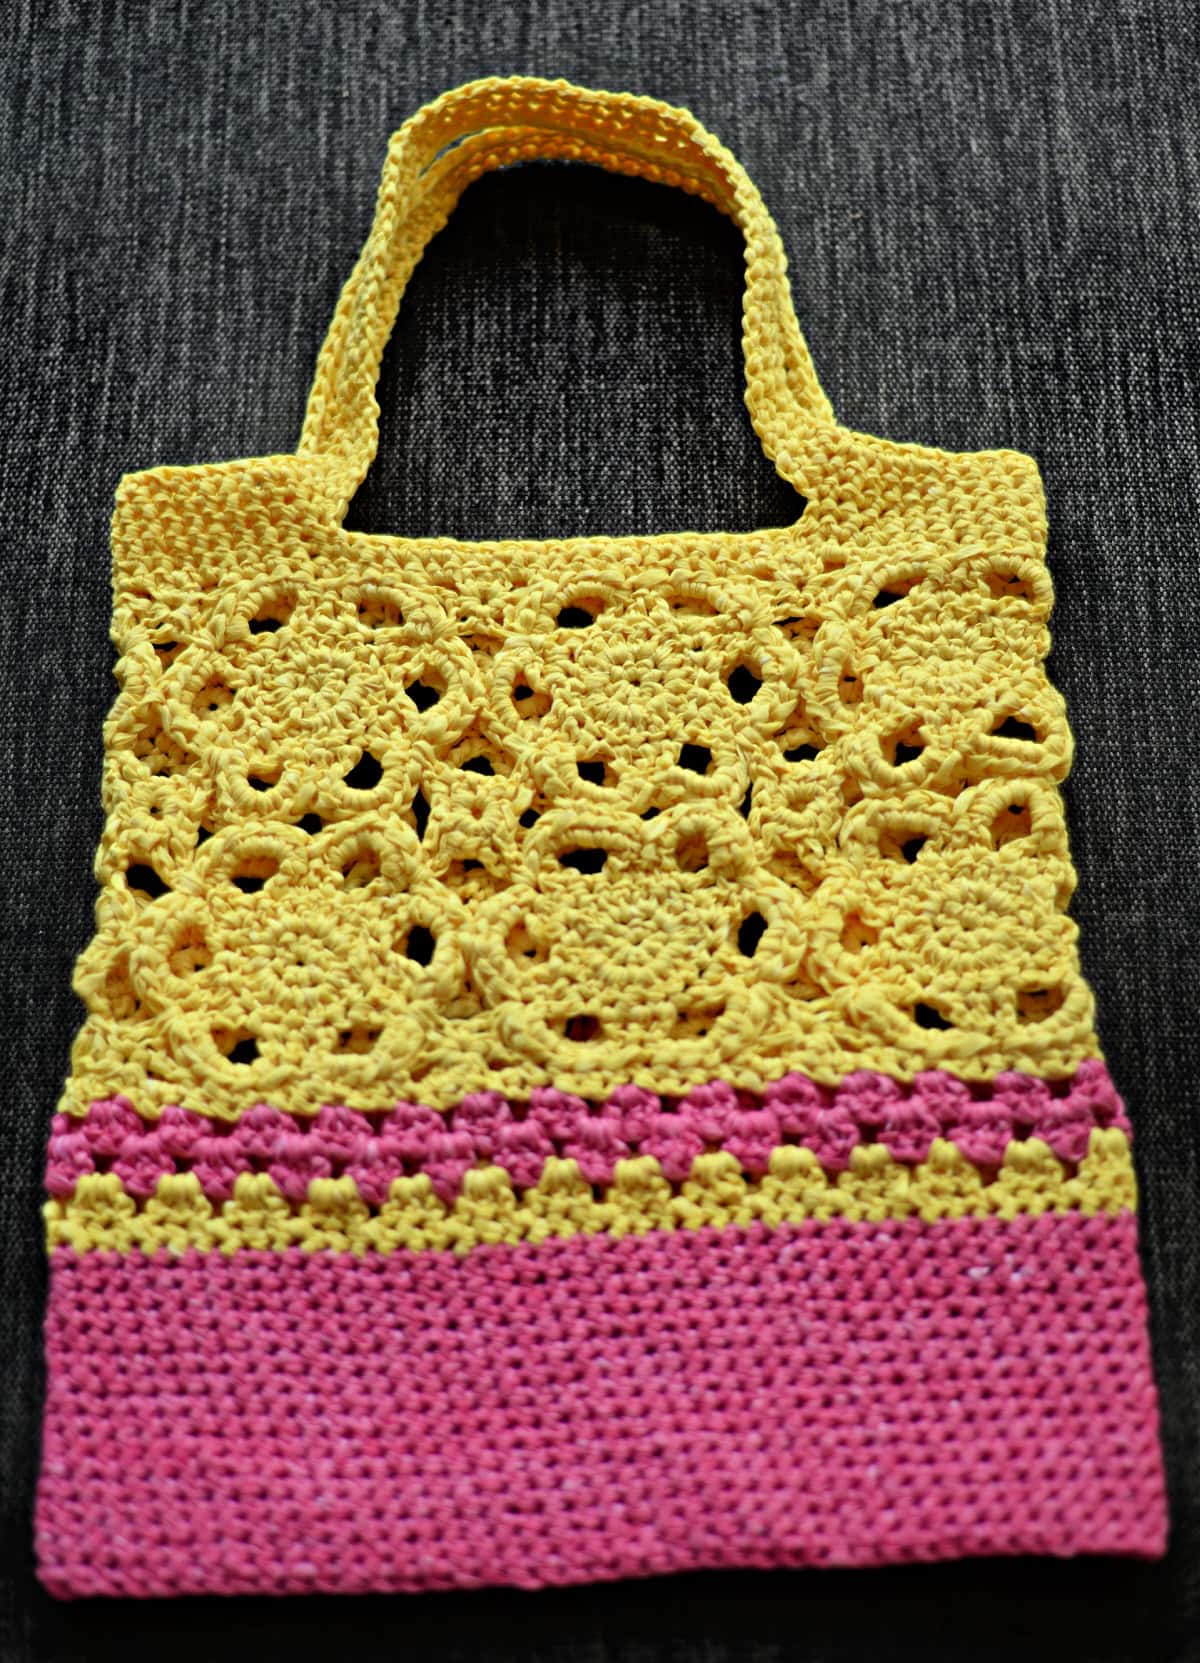 Flower crochet motif tote bag completed and ready for the bottom seam.